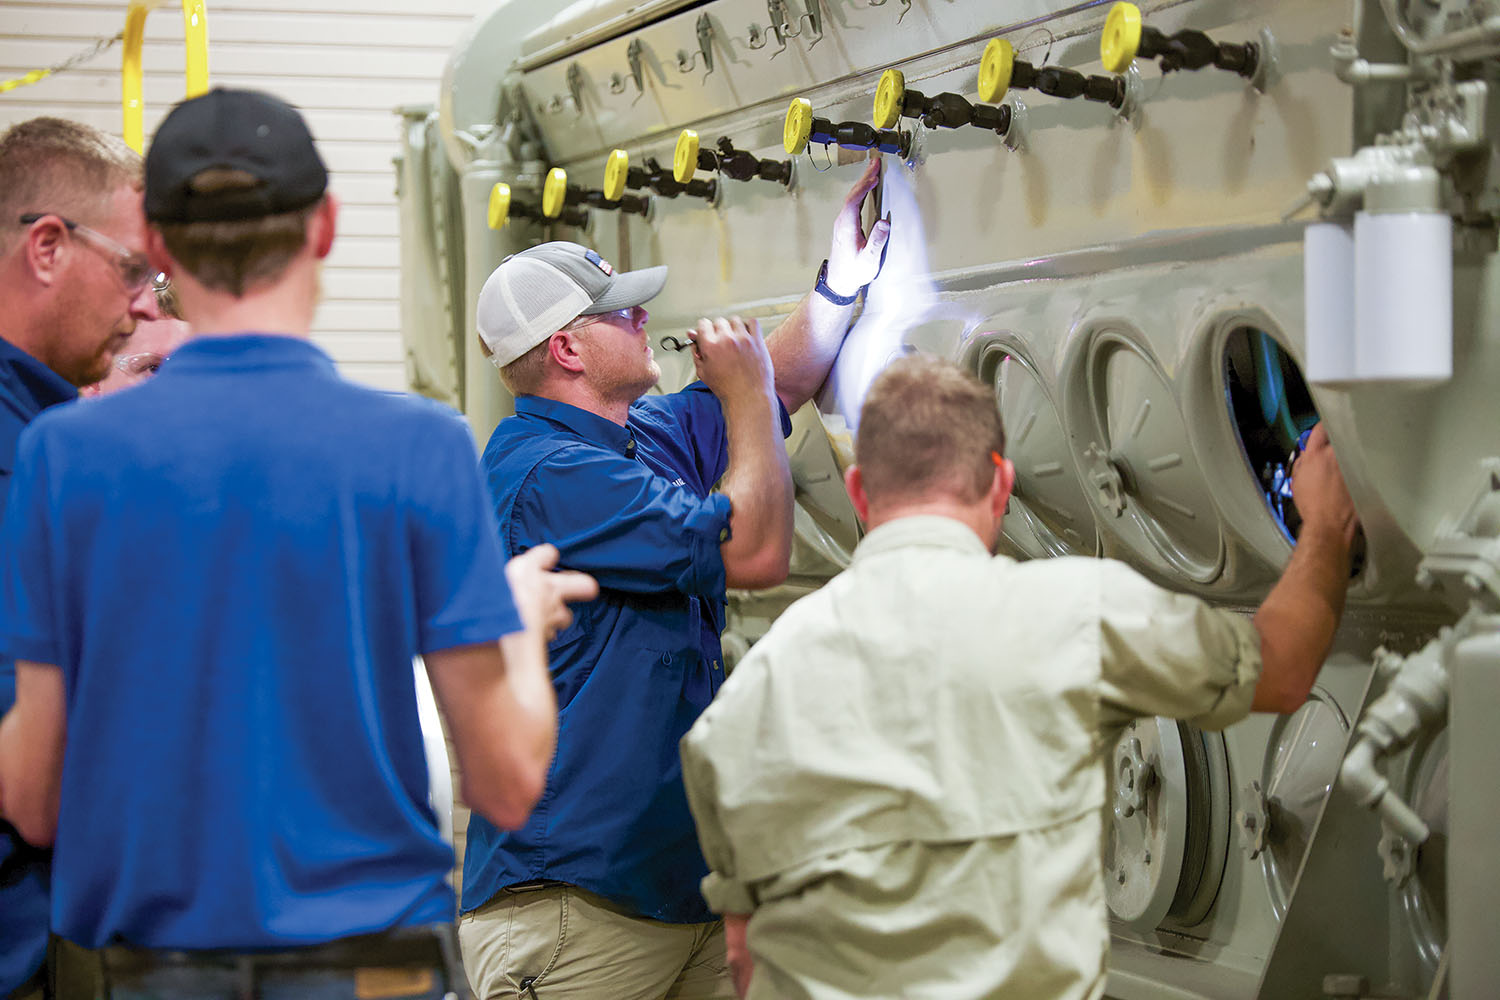 Students study a diesel engine as part of a 28-day marine engineering “boot camp” offered by West Kentucky Community & Technical College. The college was designated as a U.S. Maritime Center of Excellence for Domestic Maritime Workforce Training and Education in 2021, the only such designation of 27 centers nationwide specifically for brown-water mariners. (photo courtesy of West Kentucky Community & Technical College)